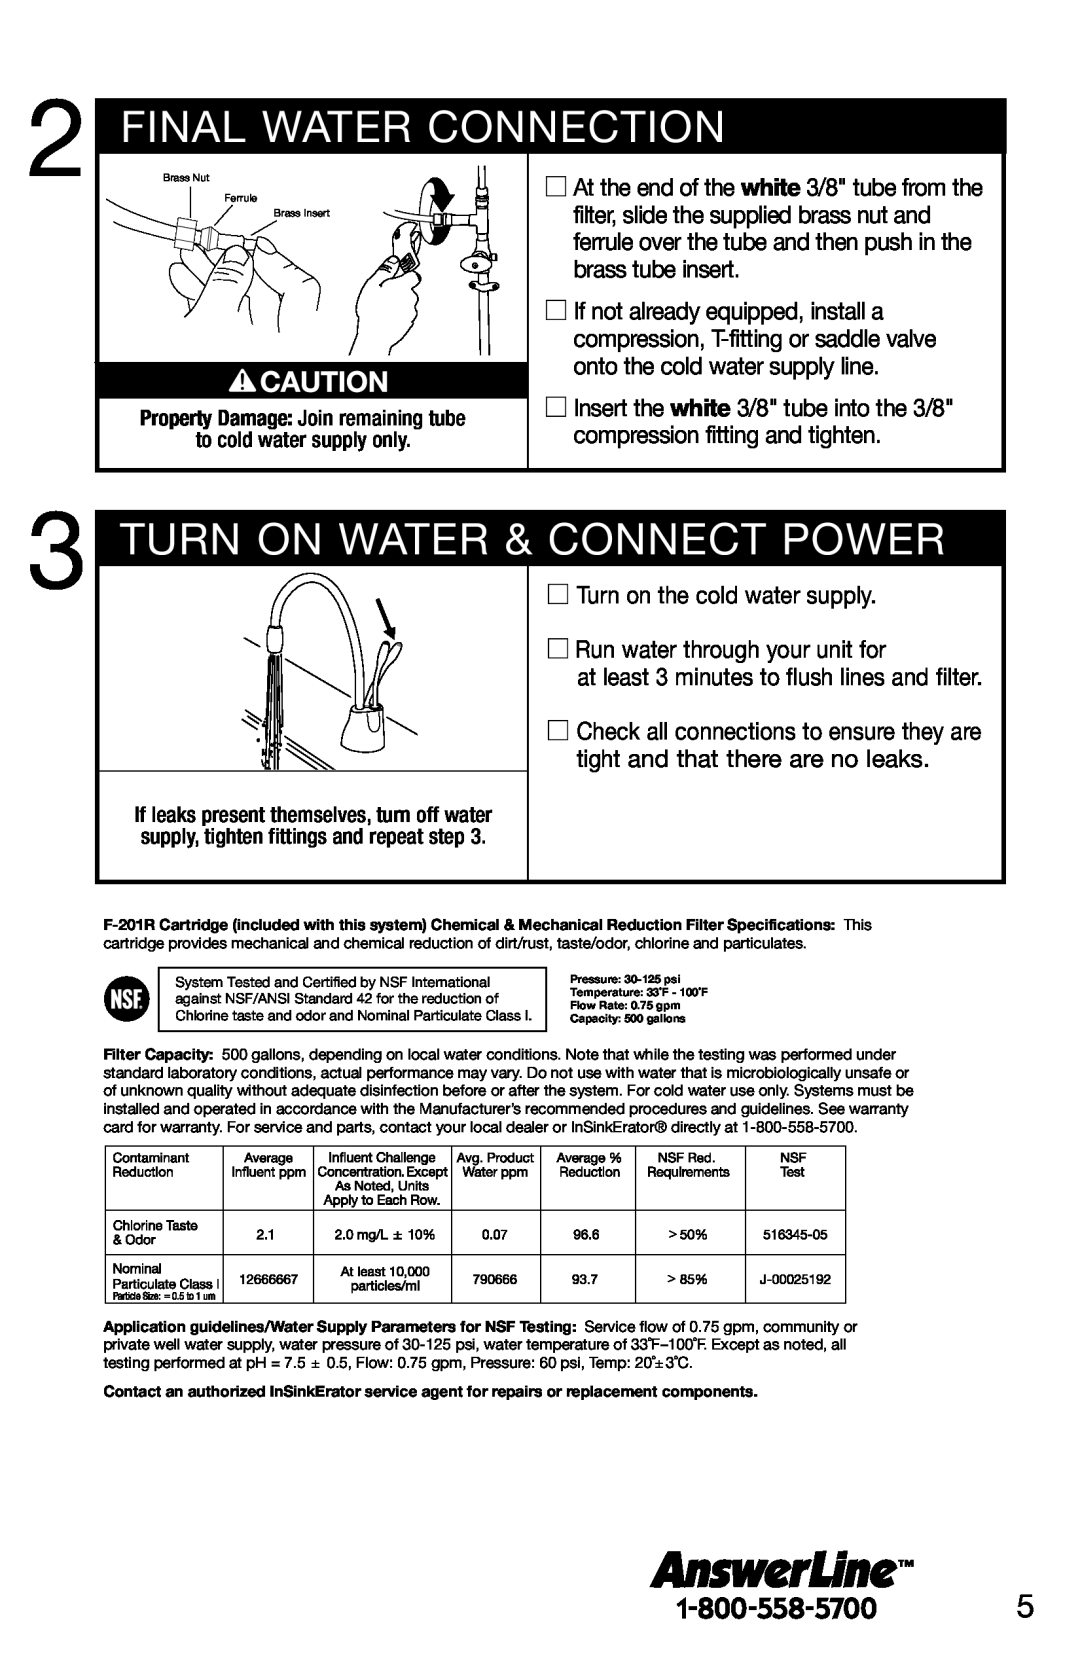 InSinkErator F-201R installation instructions Finalwaterconnection, Connect Power 